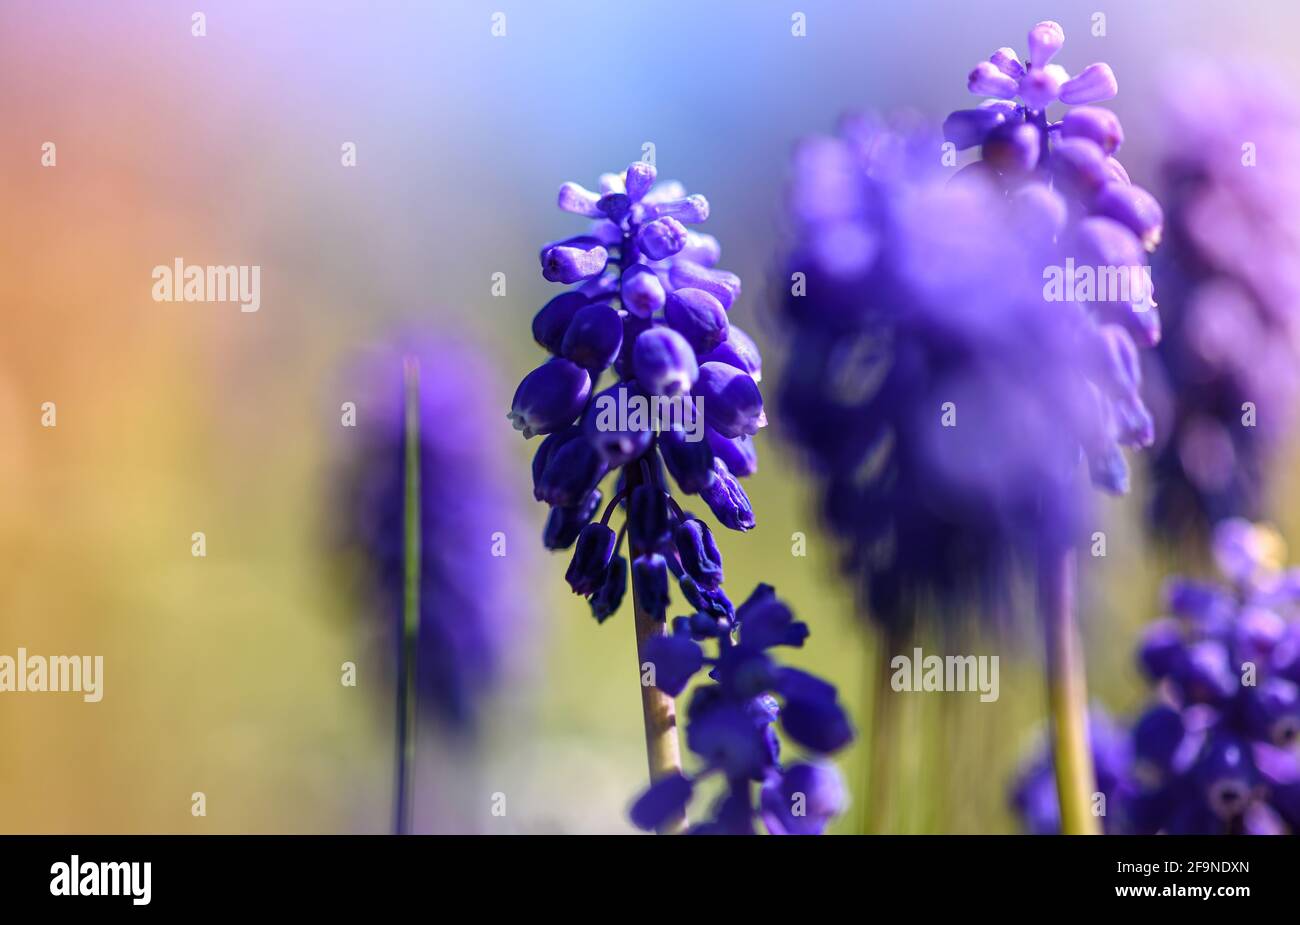 Grape hyacinth (Muscari neglectum) is a blue perennial bulbous plant or flower. Close up view Stock Photo